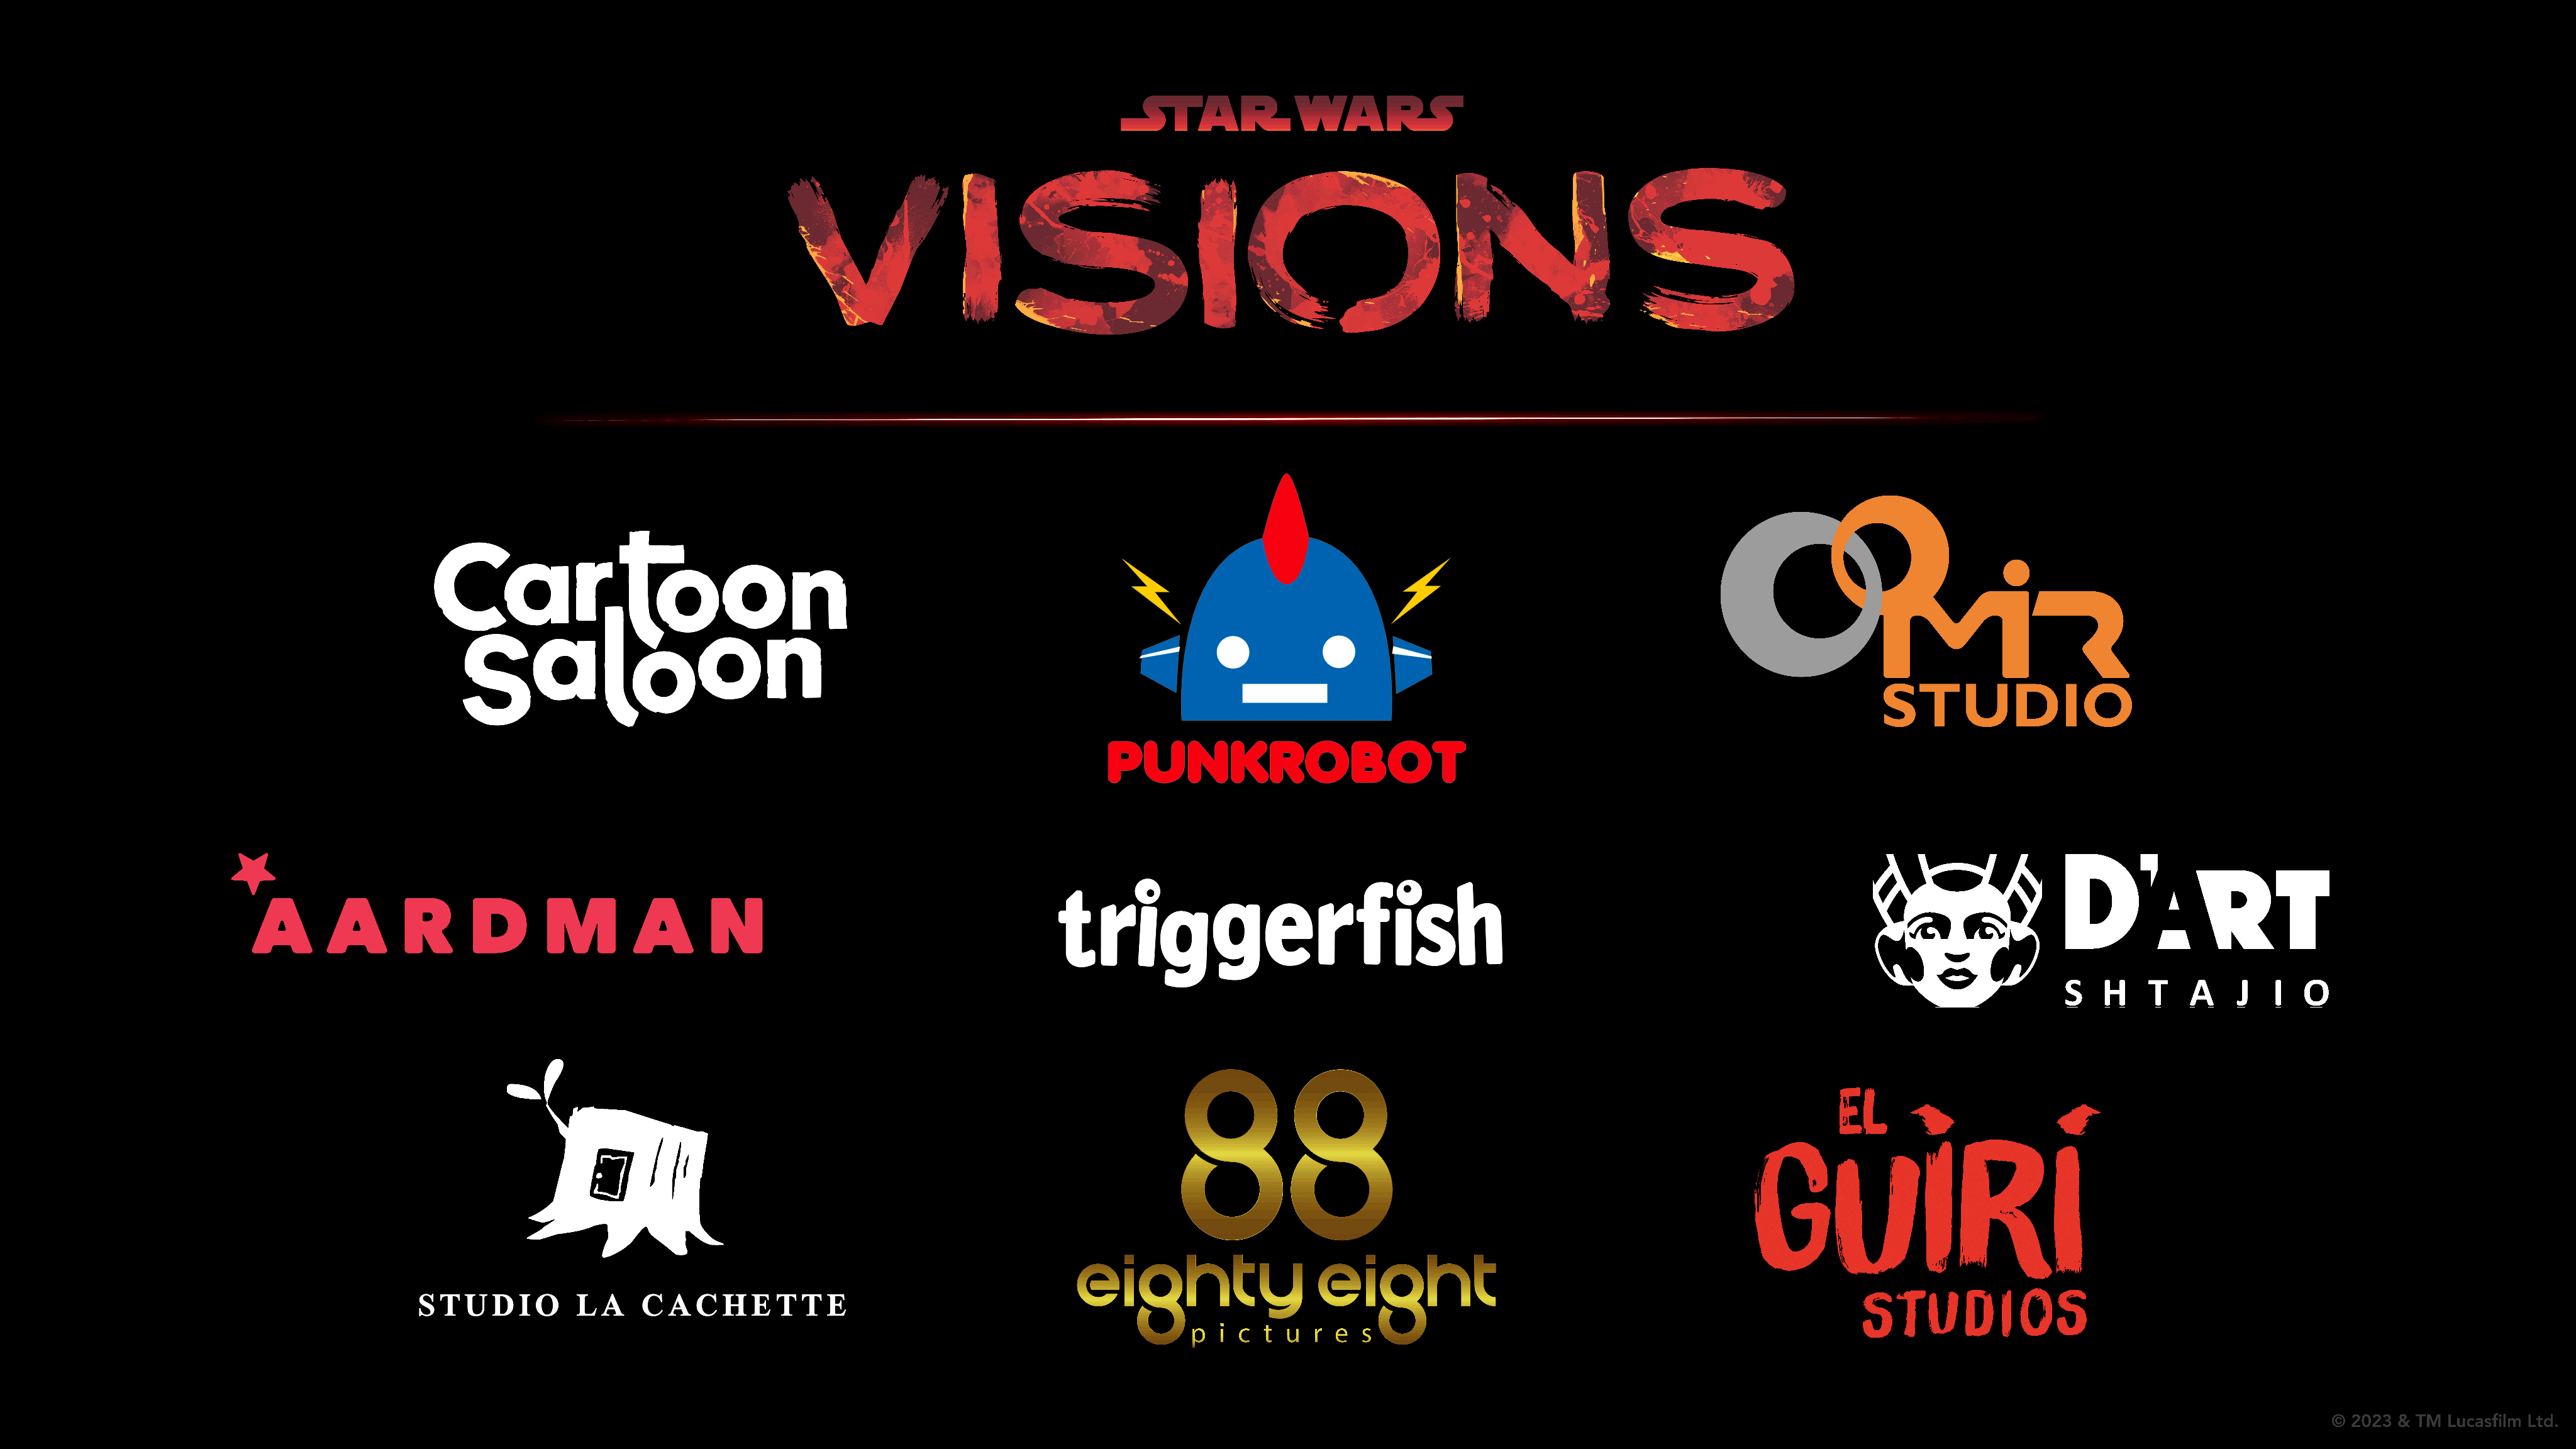 Star Wars Visions' Volume 2 Release Date, Animation Studios, and Episode  Titles Announced - Star Wars News Net